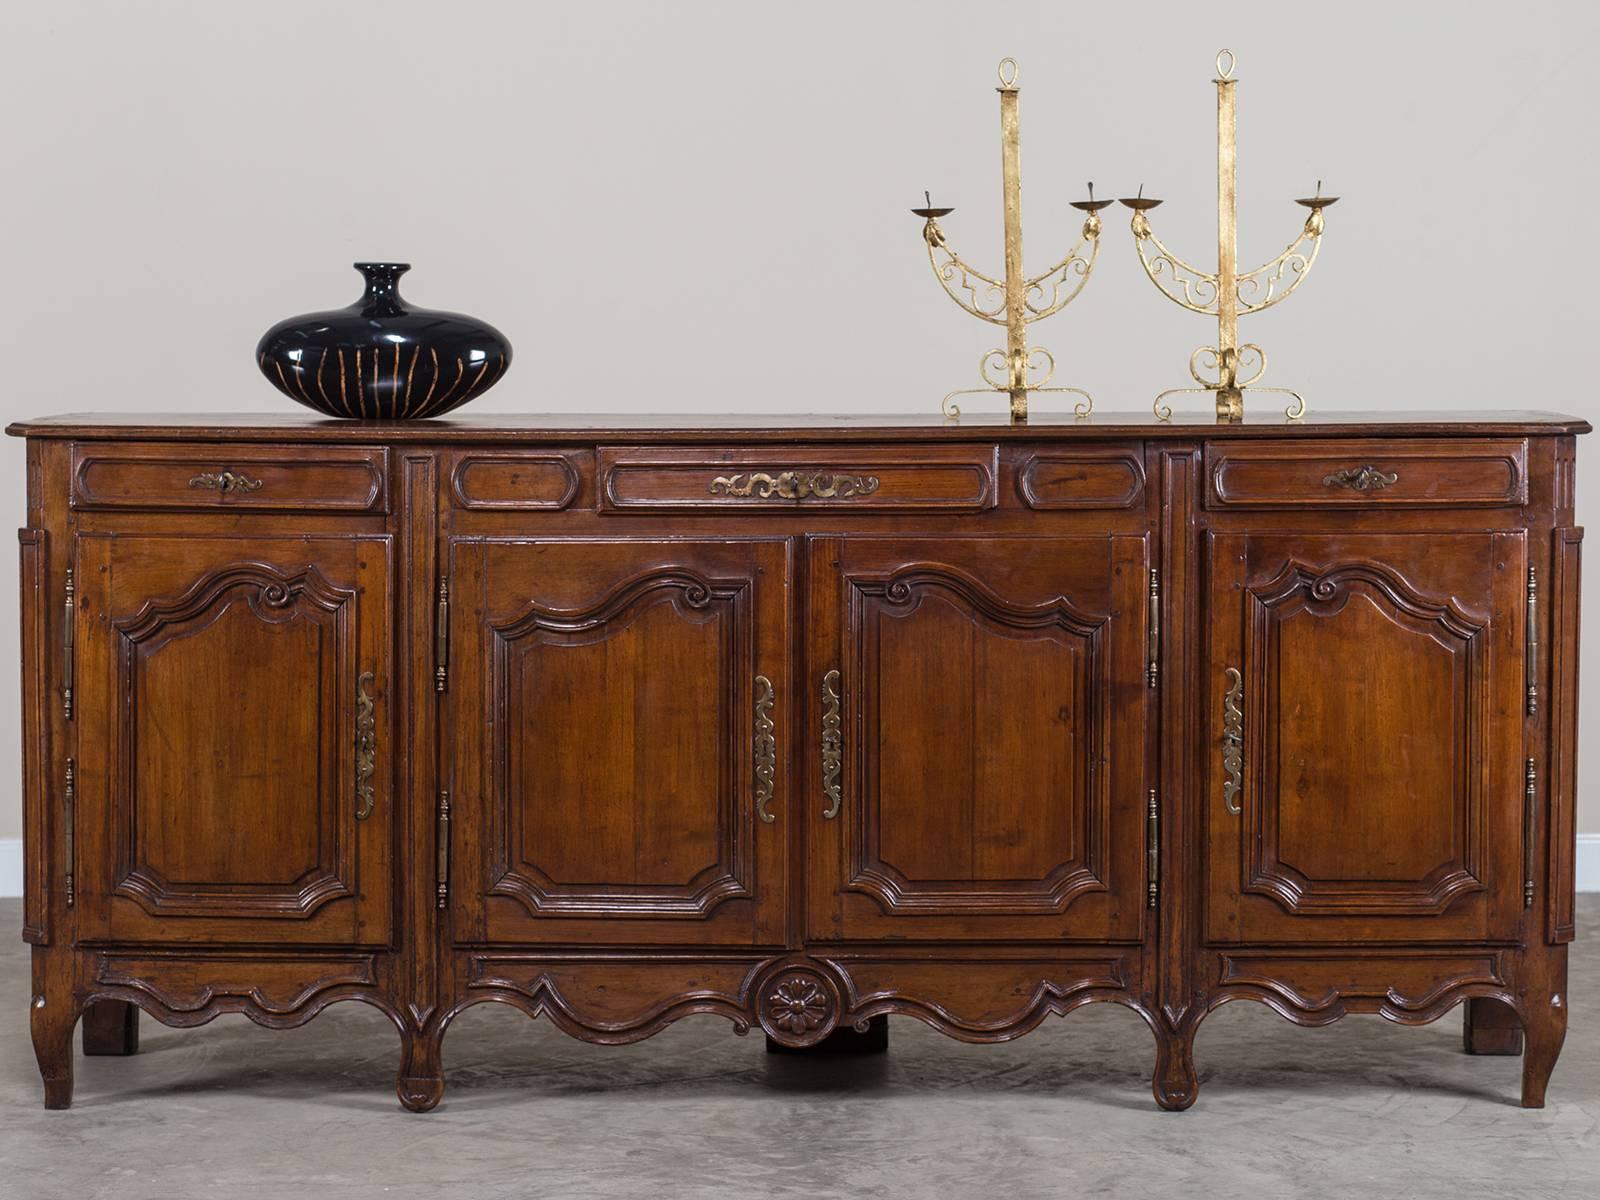 The elegant balance of the decorative details on this 18th century French buffet or credenza showcases the superb skill of cabinet making in France. Please note the symmetry of the moulding on each of the four cabinet doors with each upper section